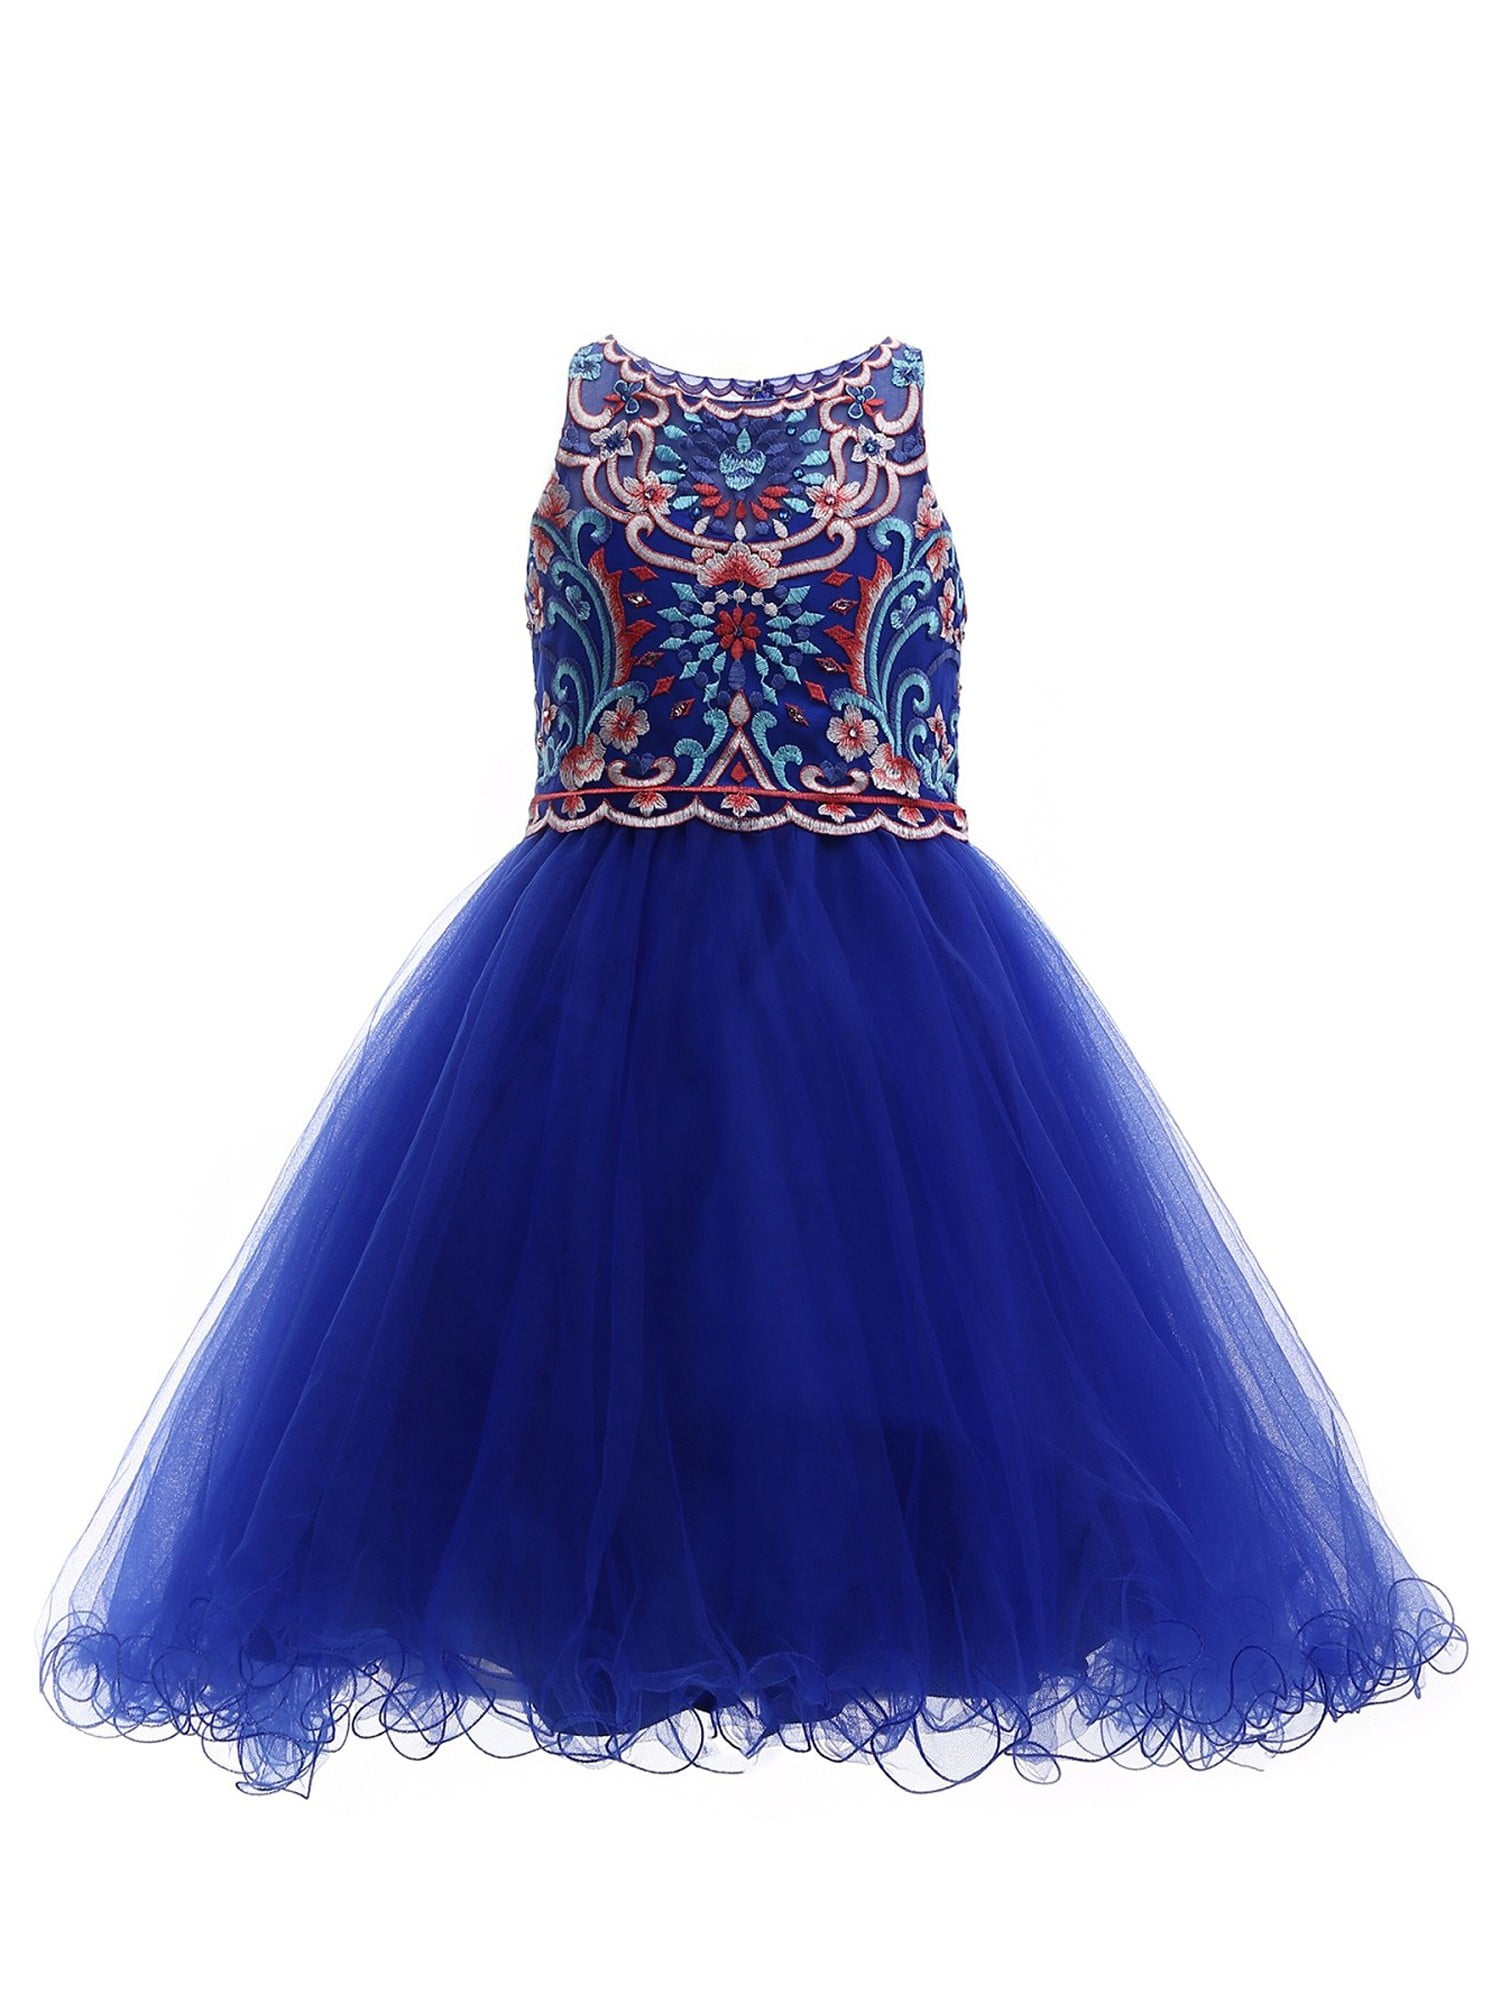 Amberry - Amberry Girls Royal Blue Colored Embroidery Bodice Christmas